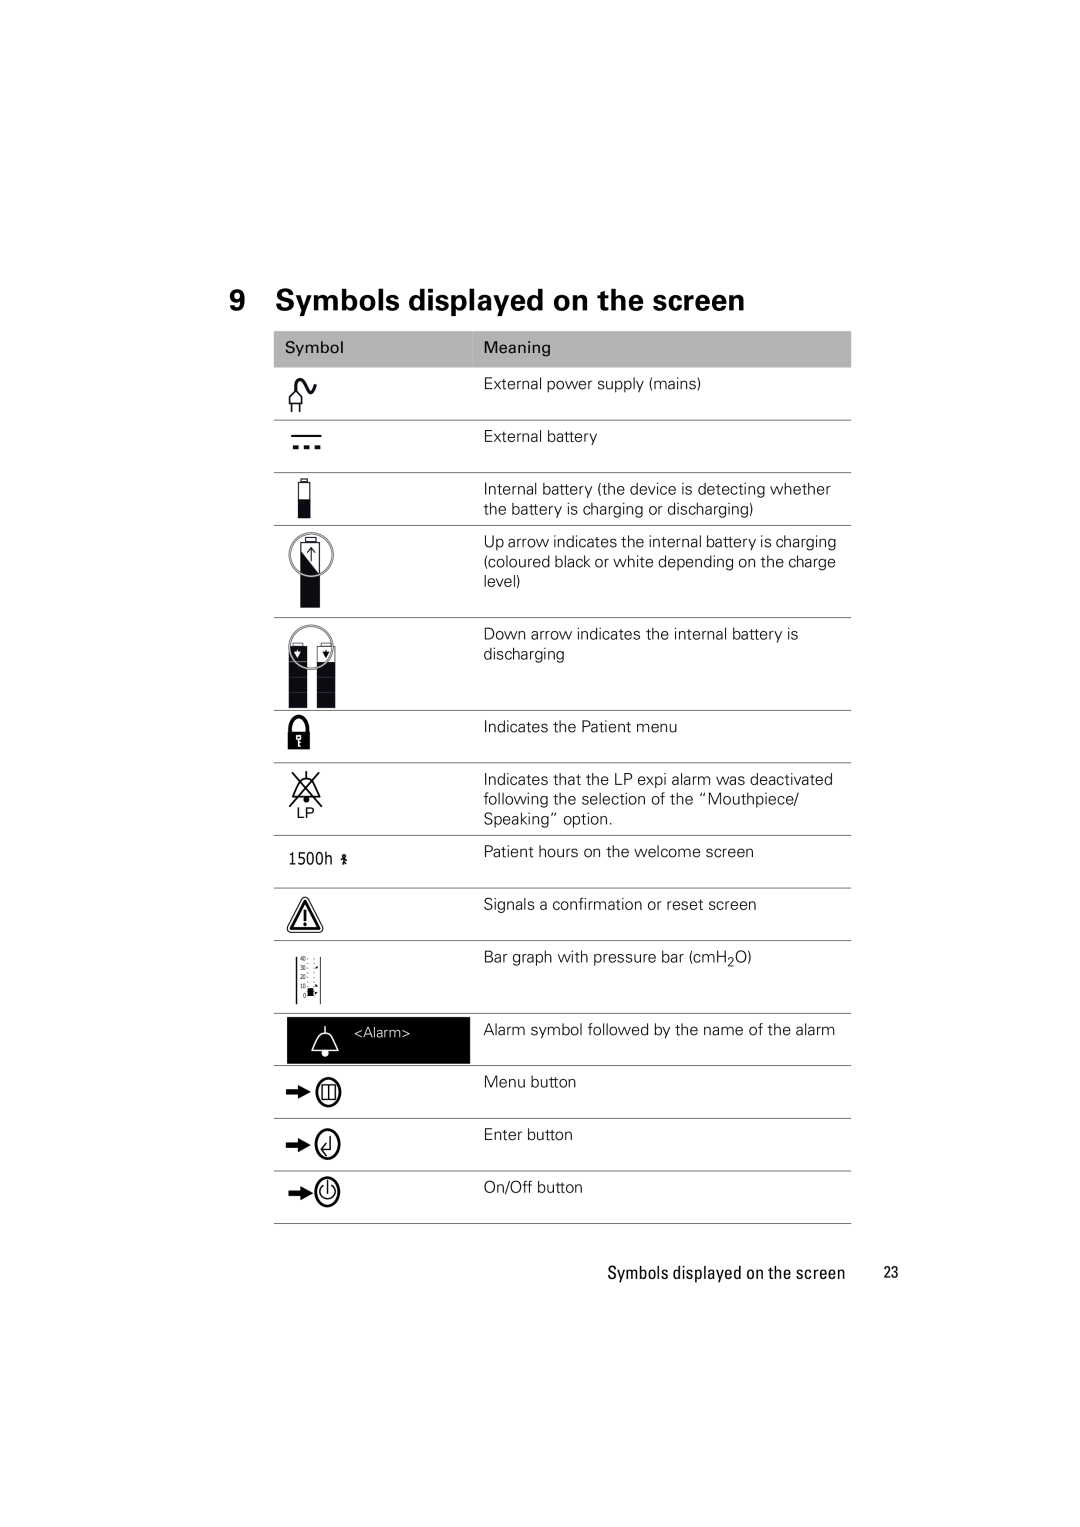 ResMed VS III user manual Symbols displayed on the screen, 1500h 